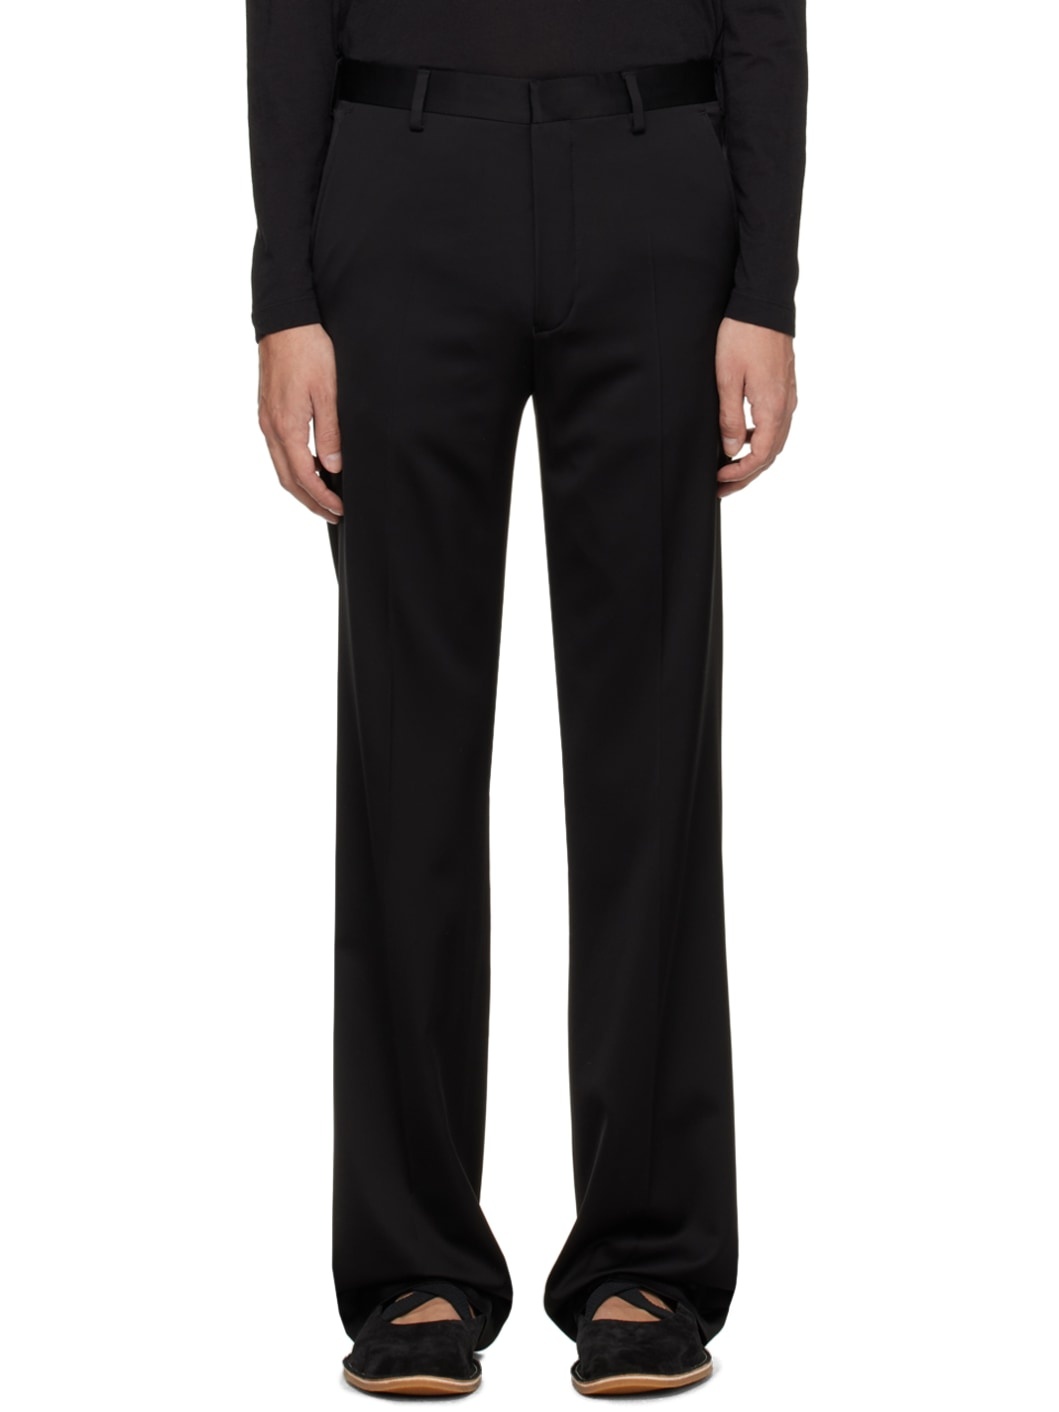 Black Creased Trousers - 1